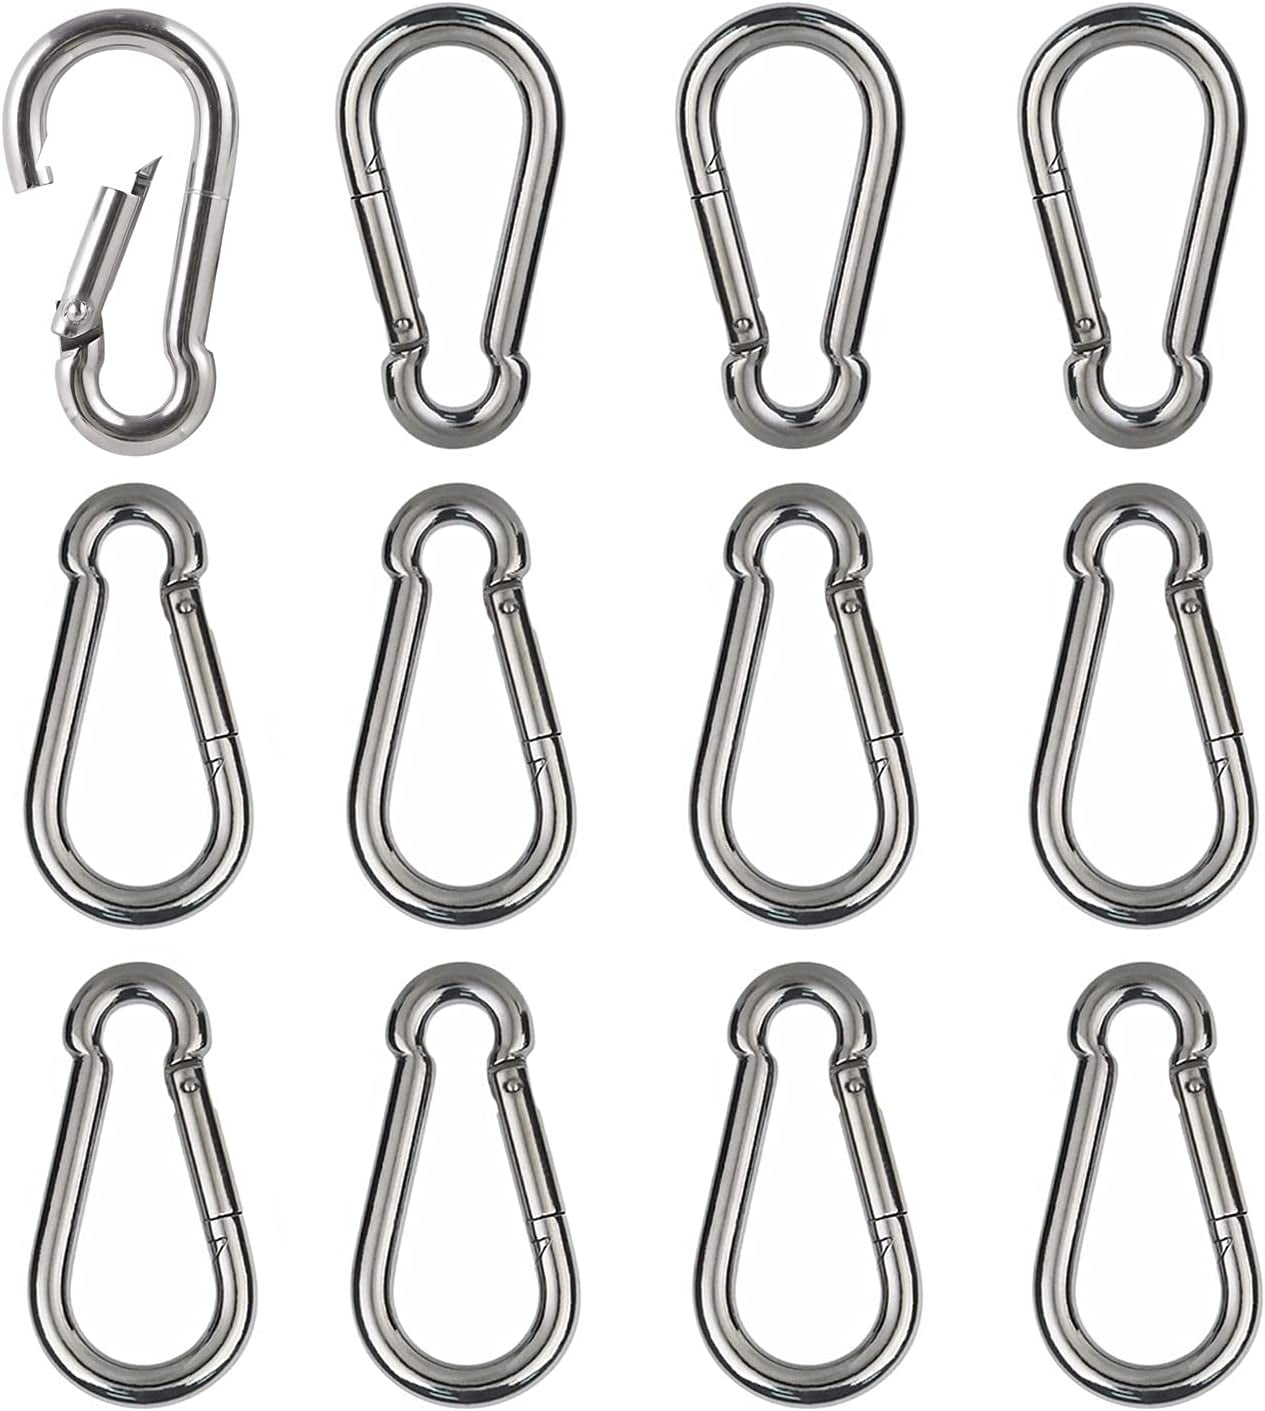 Small Carabiner Spring Snap Hook - M4 1.57 Inch Stainless Steel Carabiner,  Heavy Duty Spring Link for Camping Swing Fishing Hiking, 12PCS, Silver 